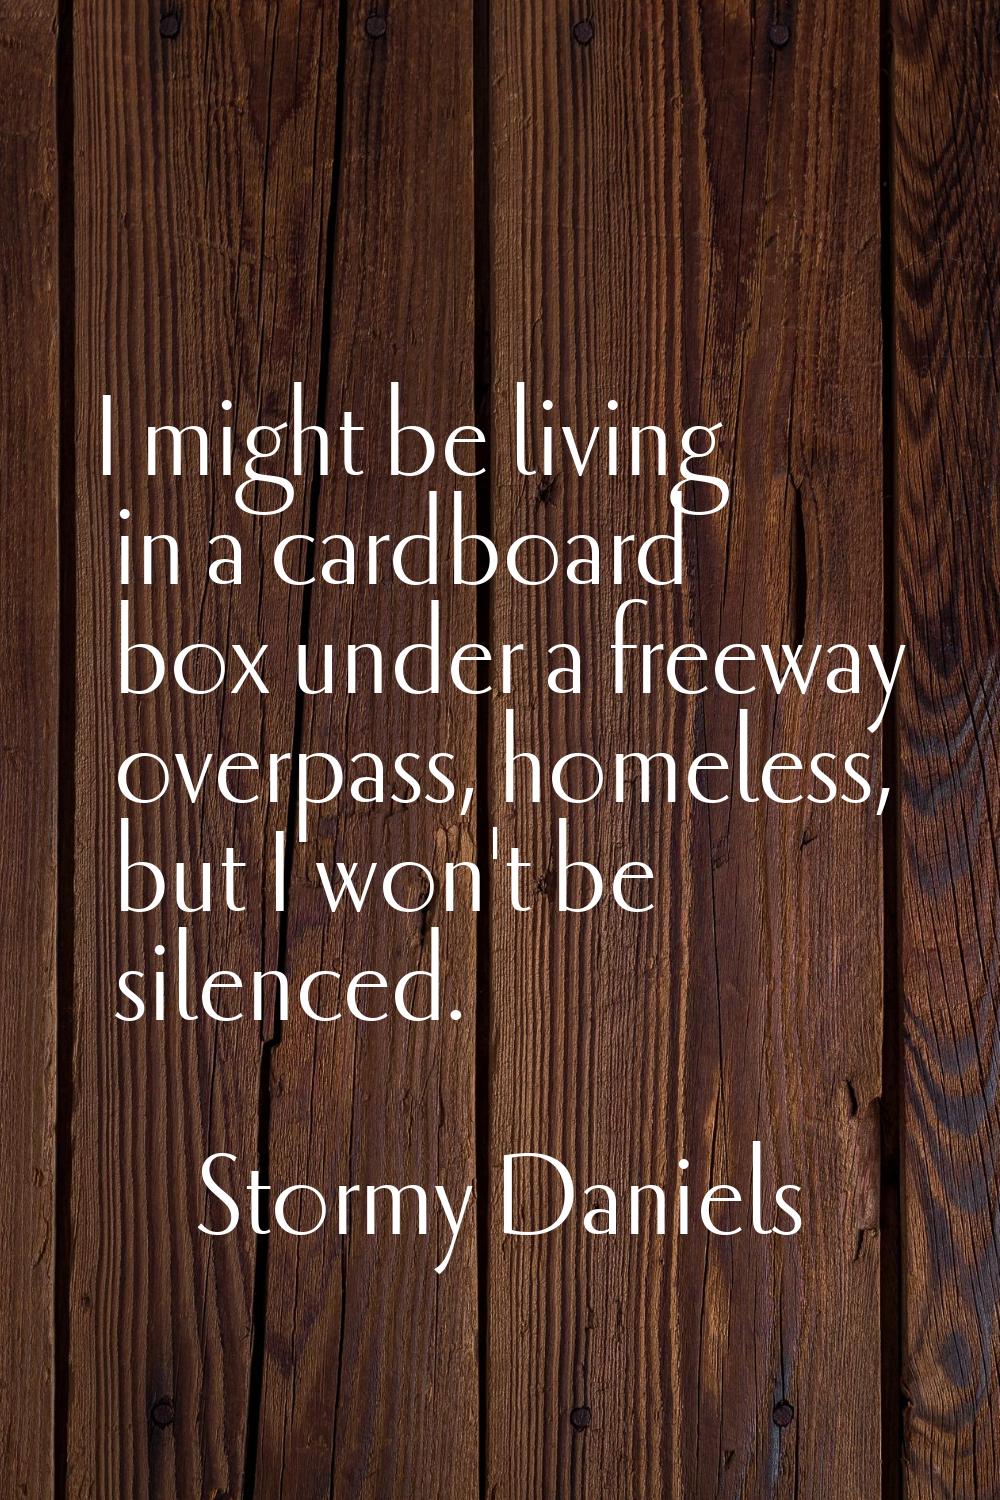 I might be living in a cardboard box under a freeway overpass, homeless, but I won't be silenced.